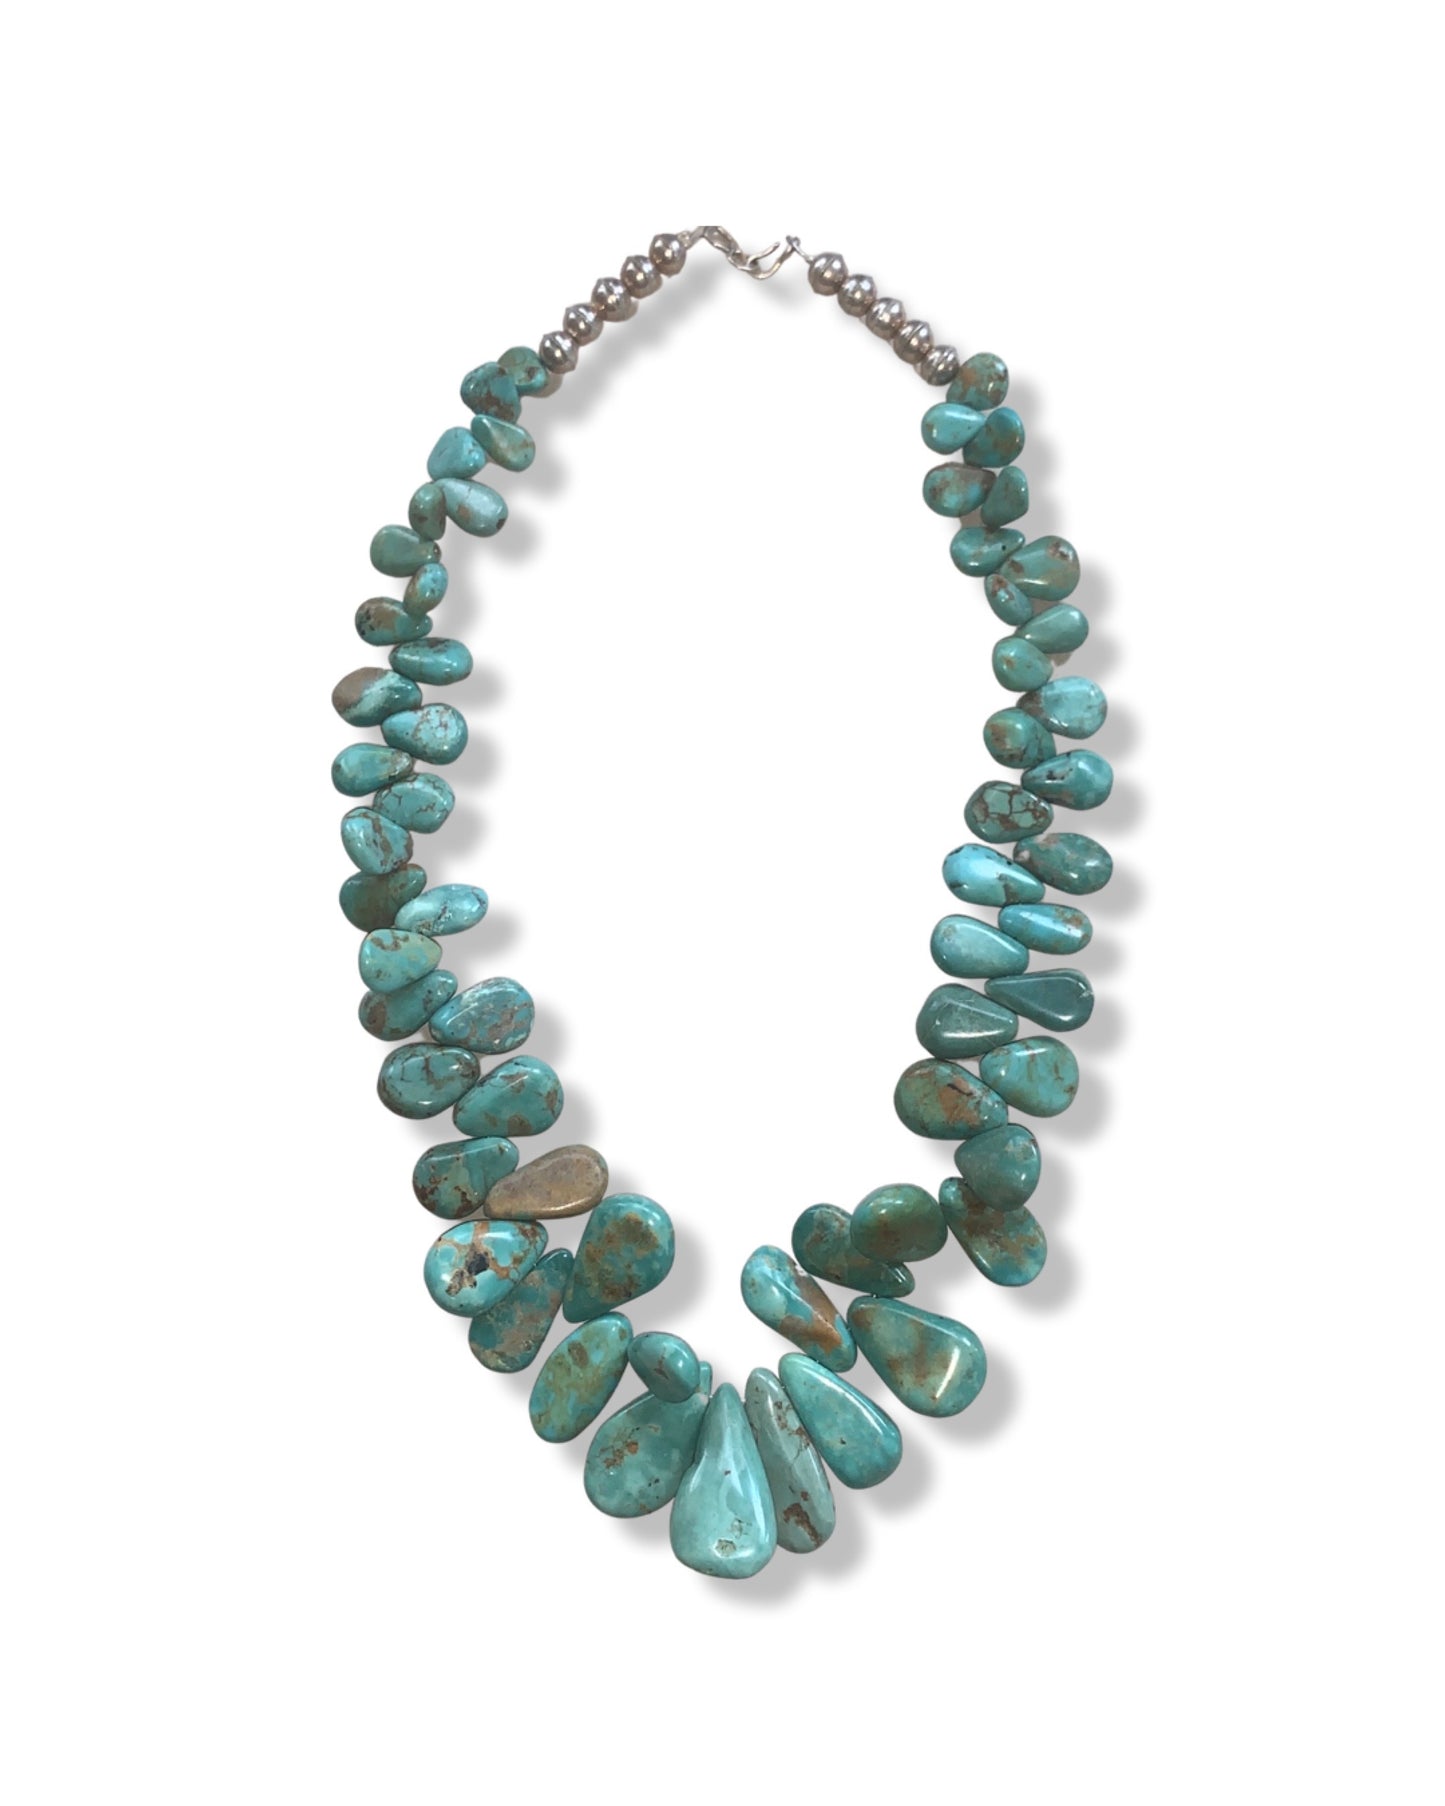 New Navajo Turquoise Necklace - by Evelyn Begay of Navajo Nation